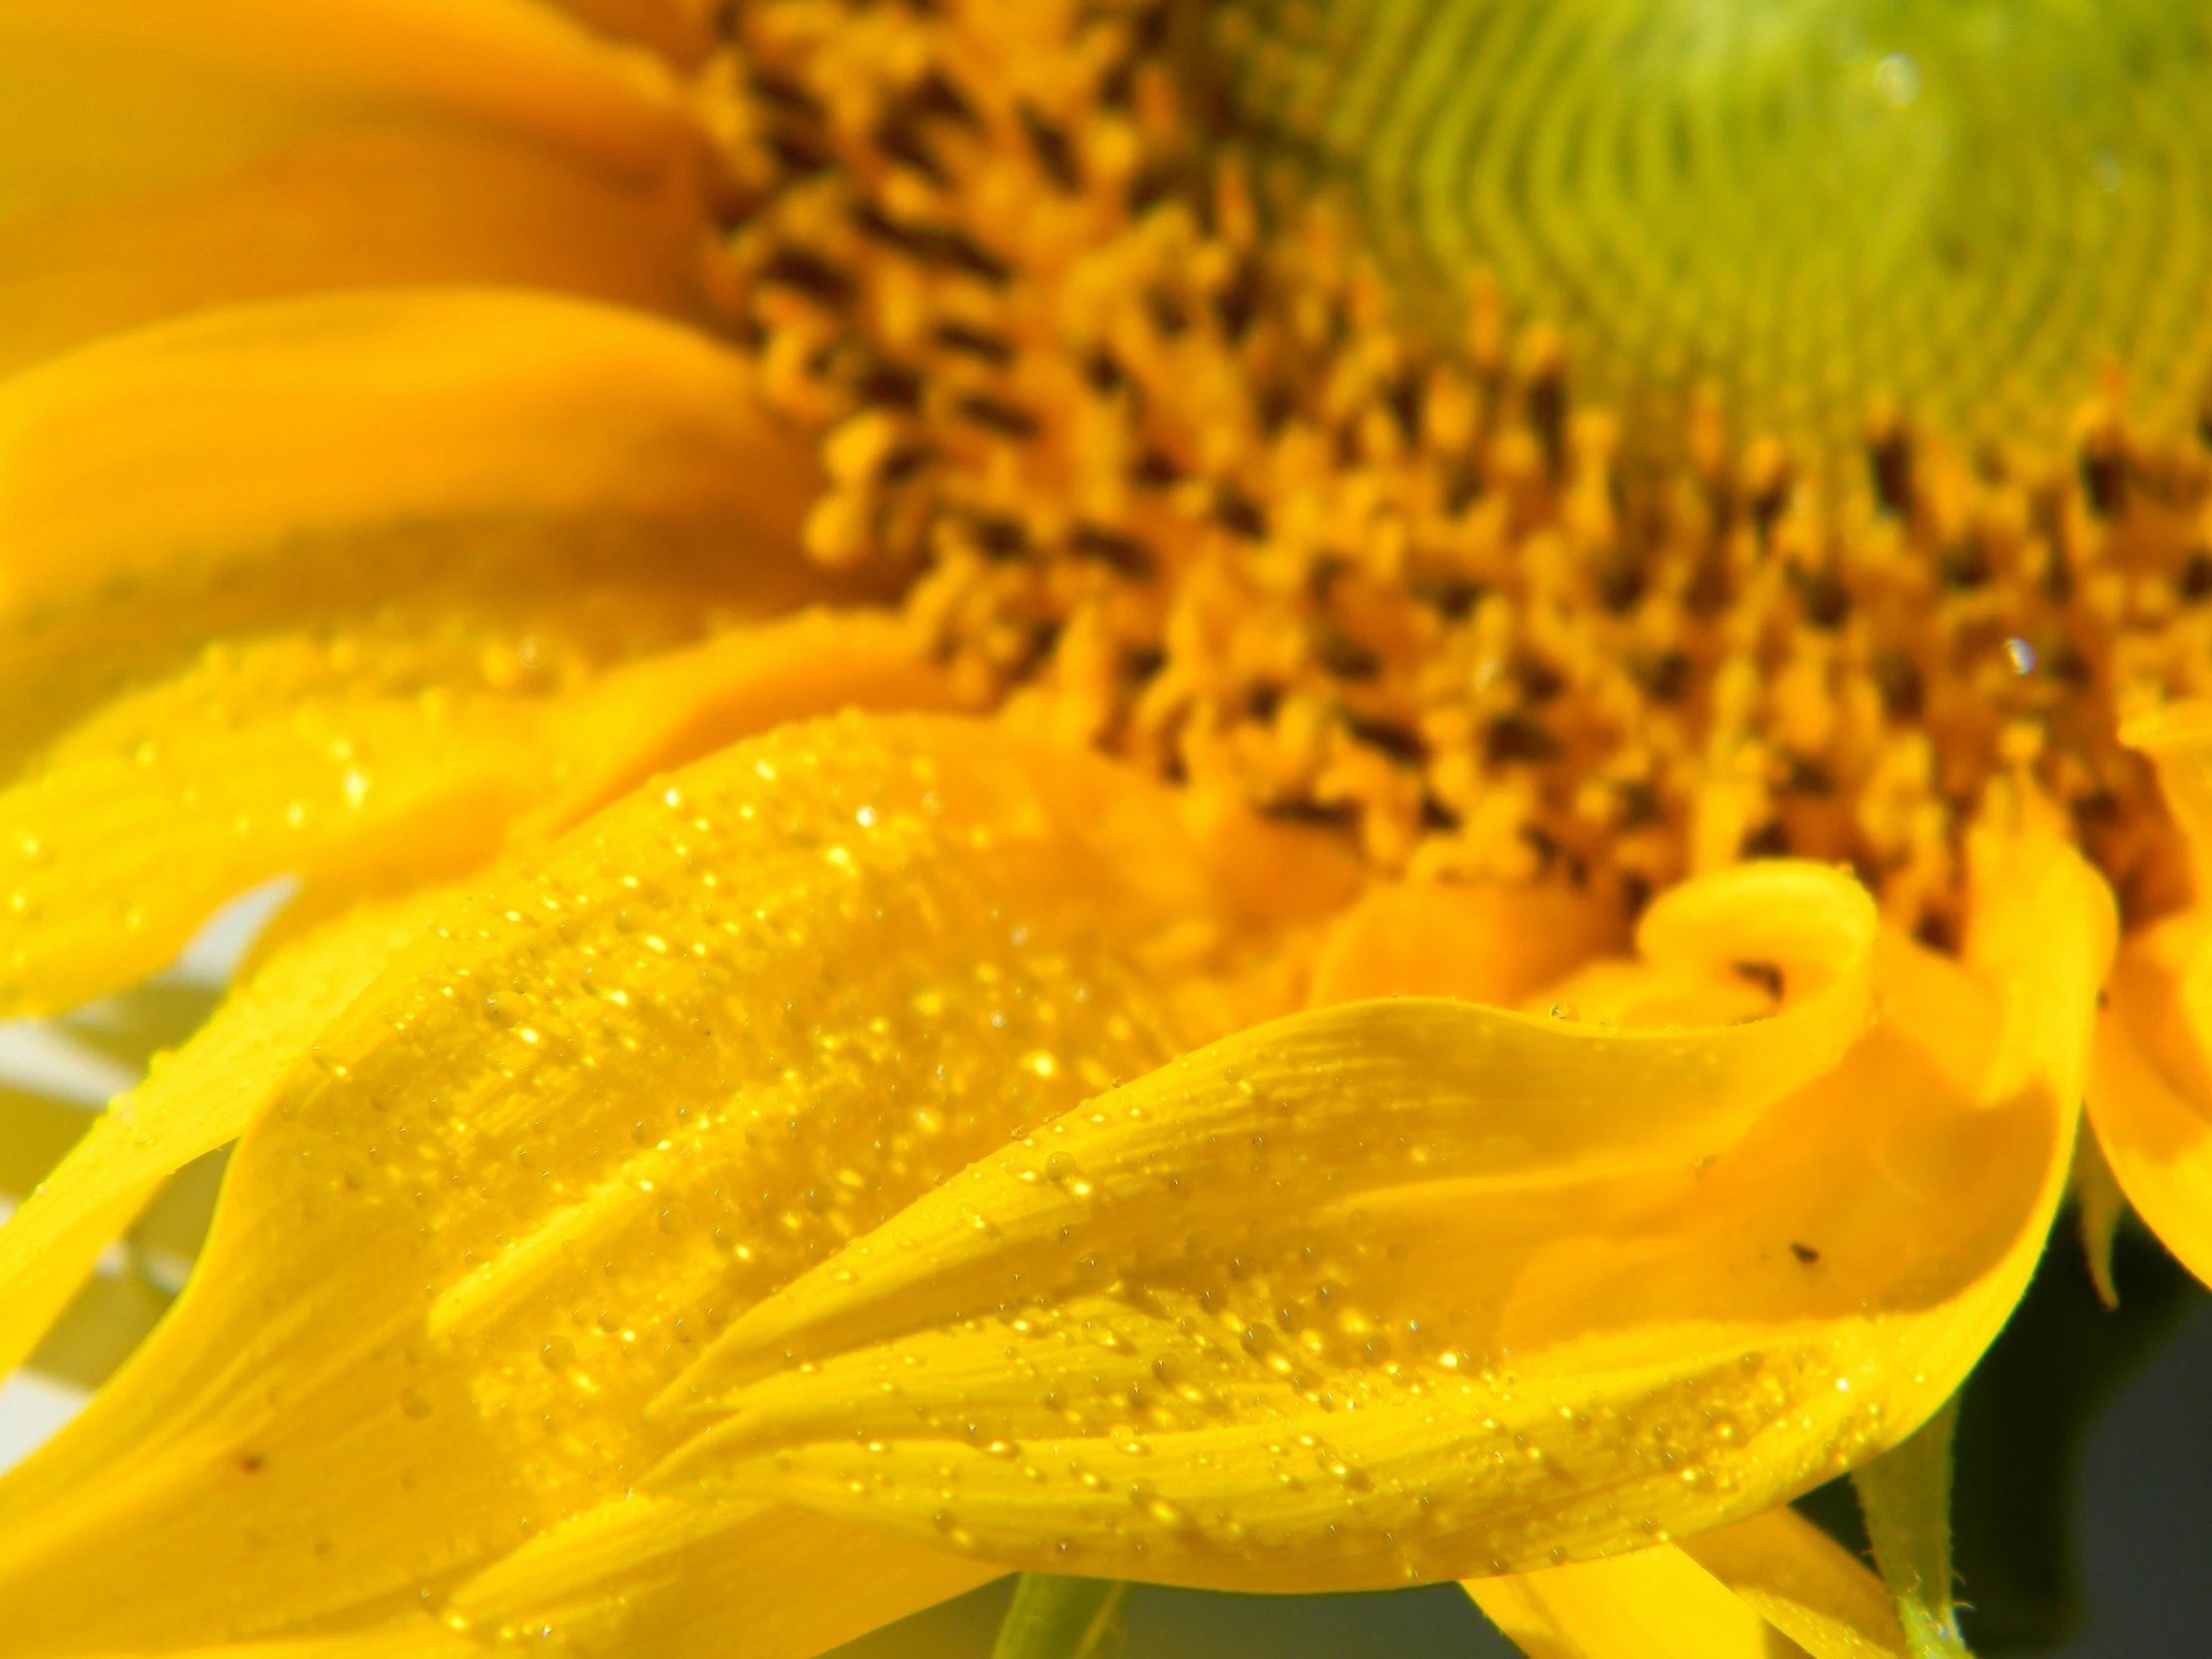 a sunflower with water droplets on it's petals